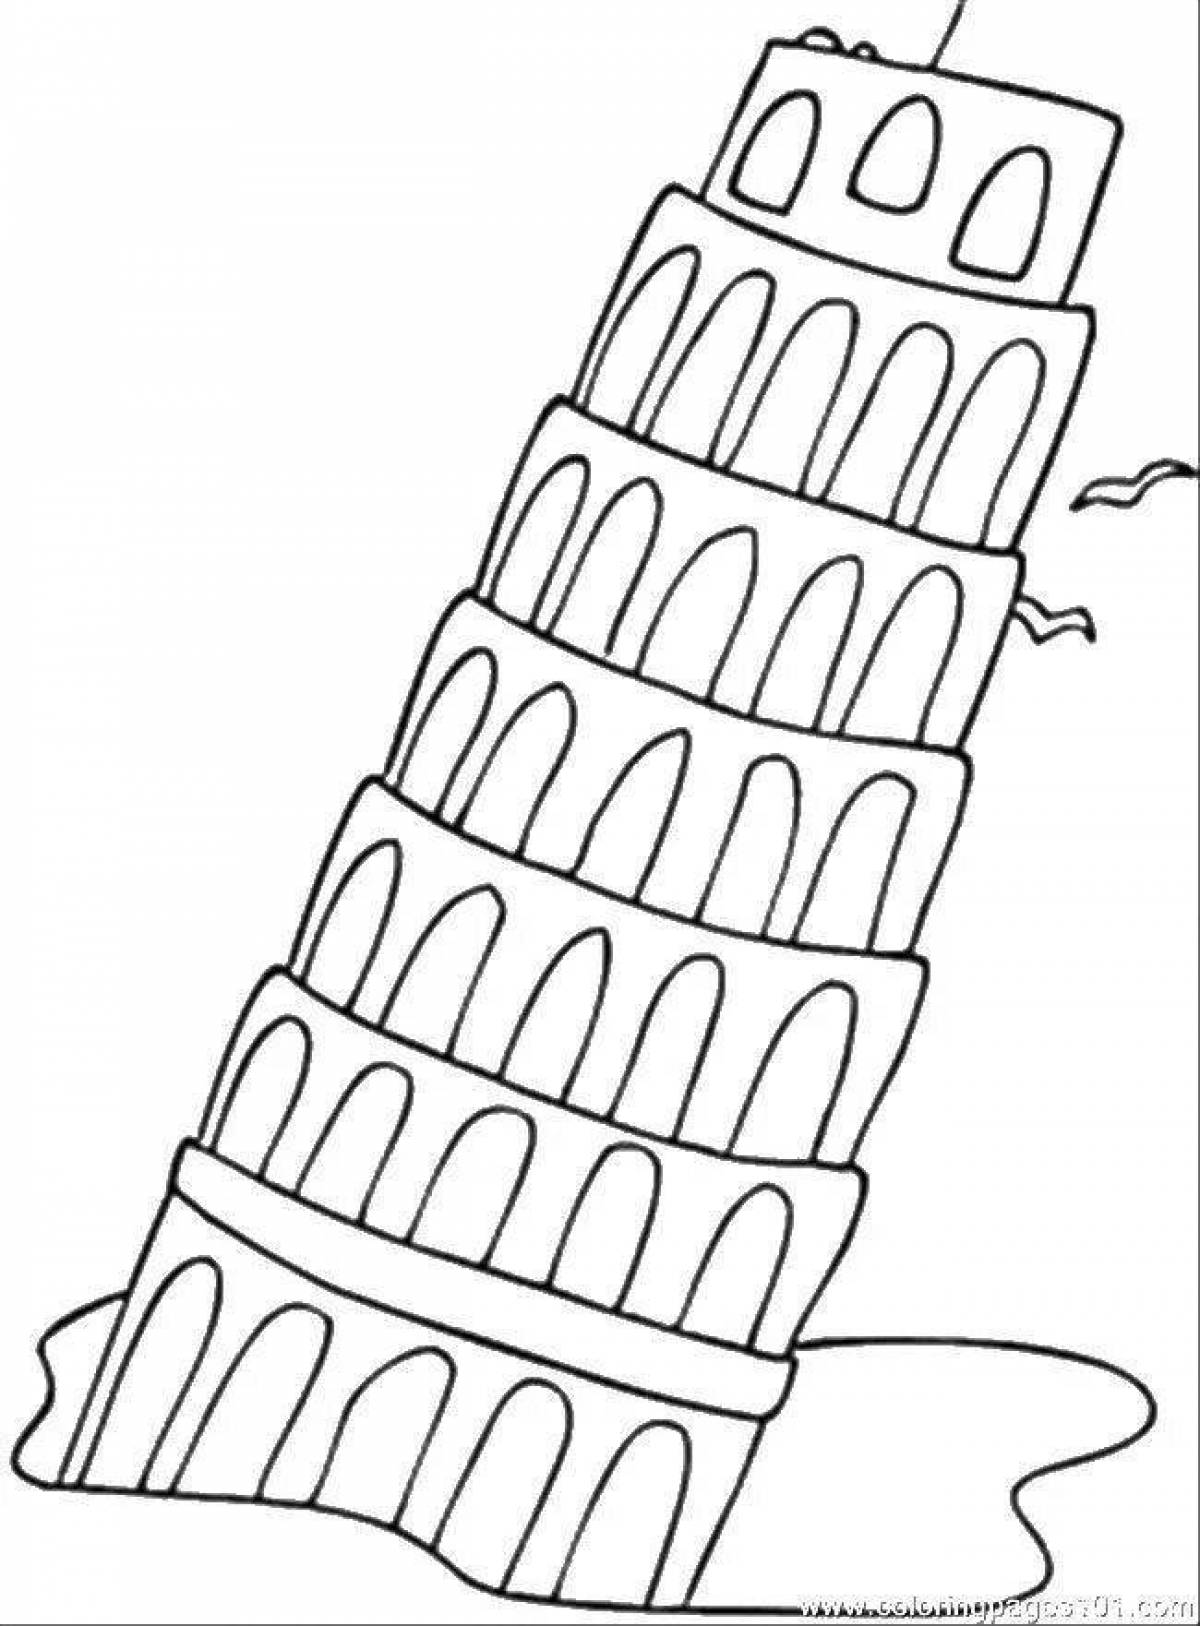 Elegant coloring of the Leaning Tower of Pisa